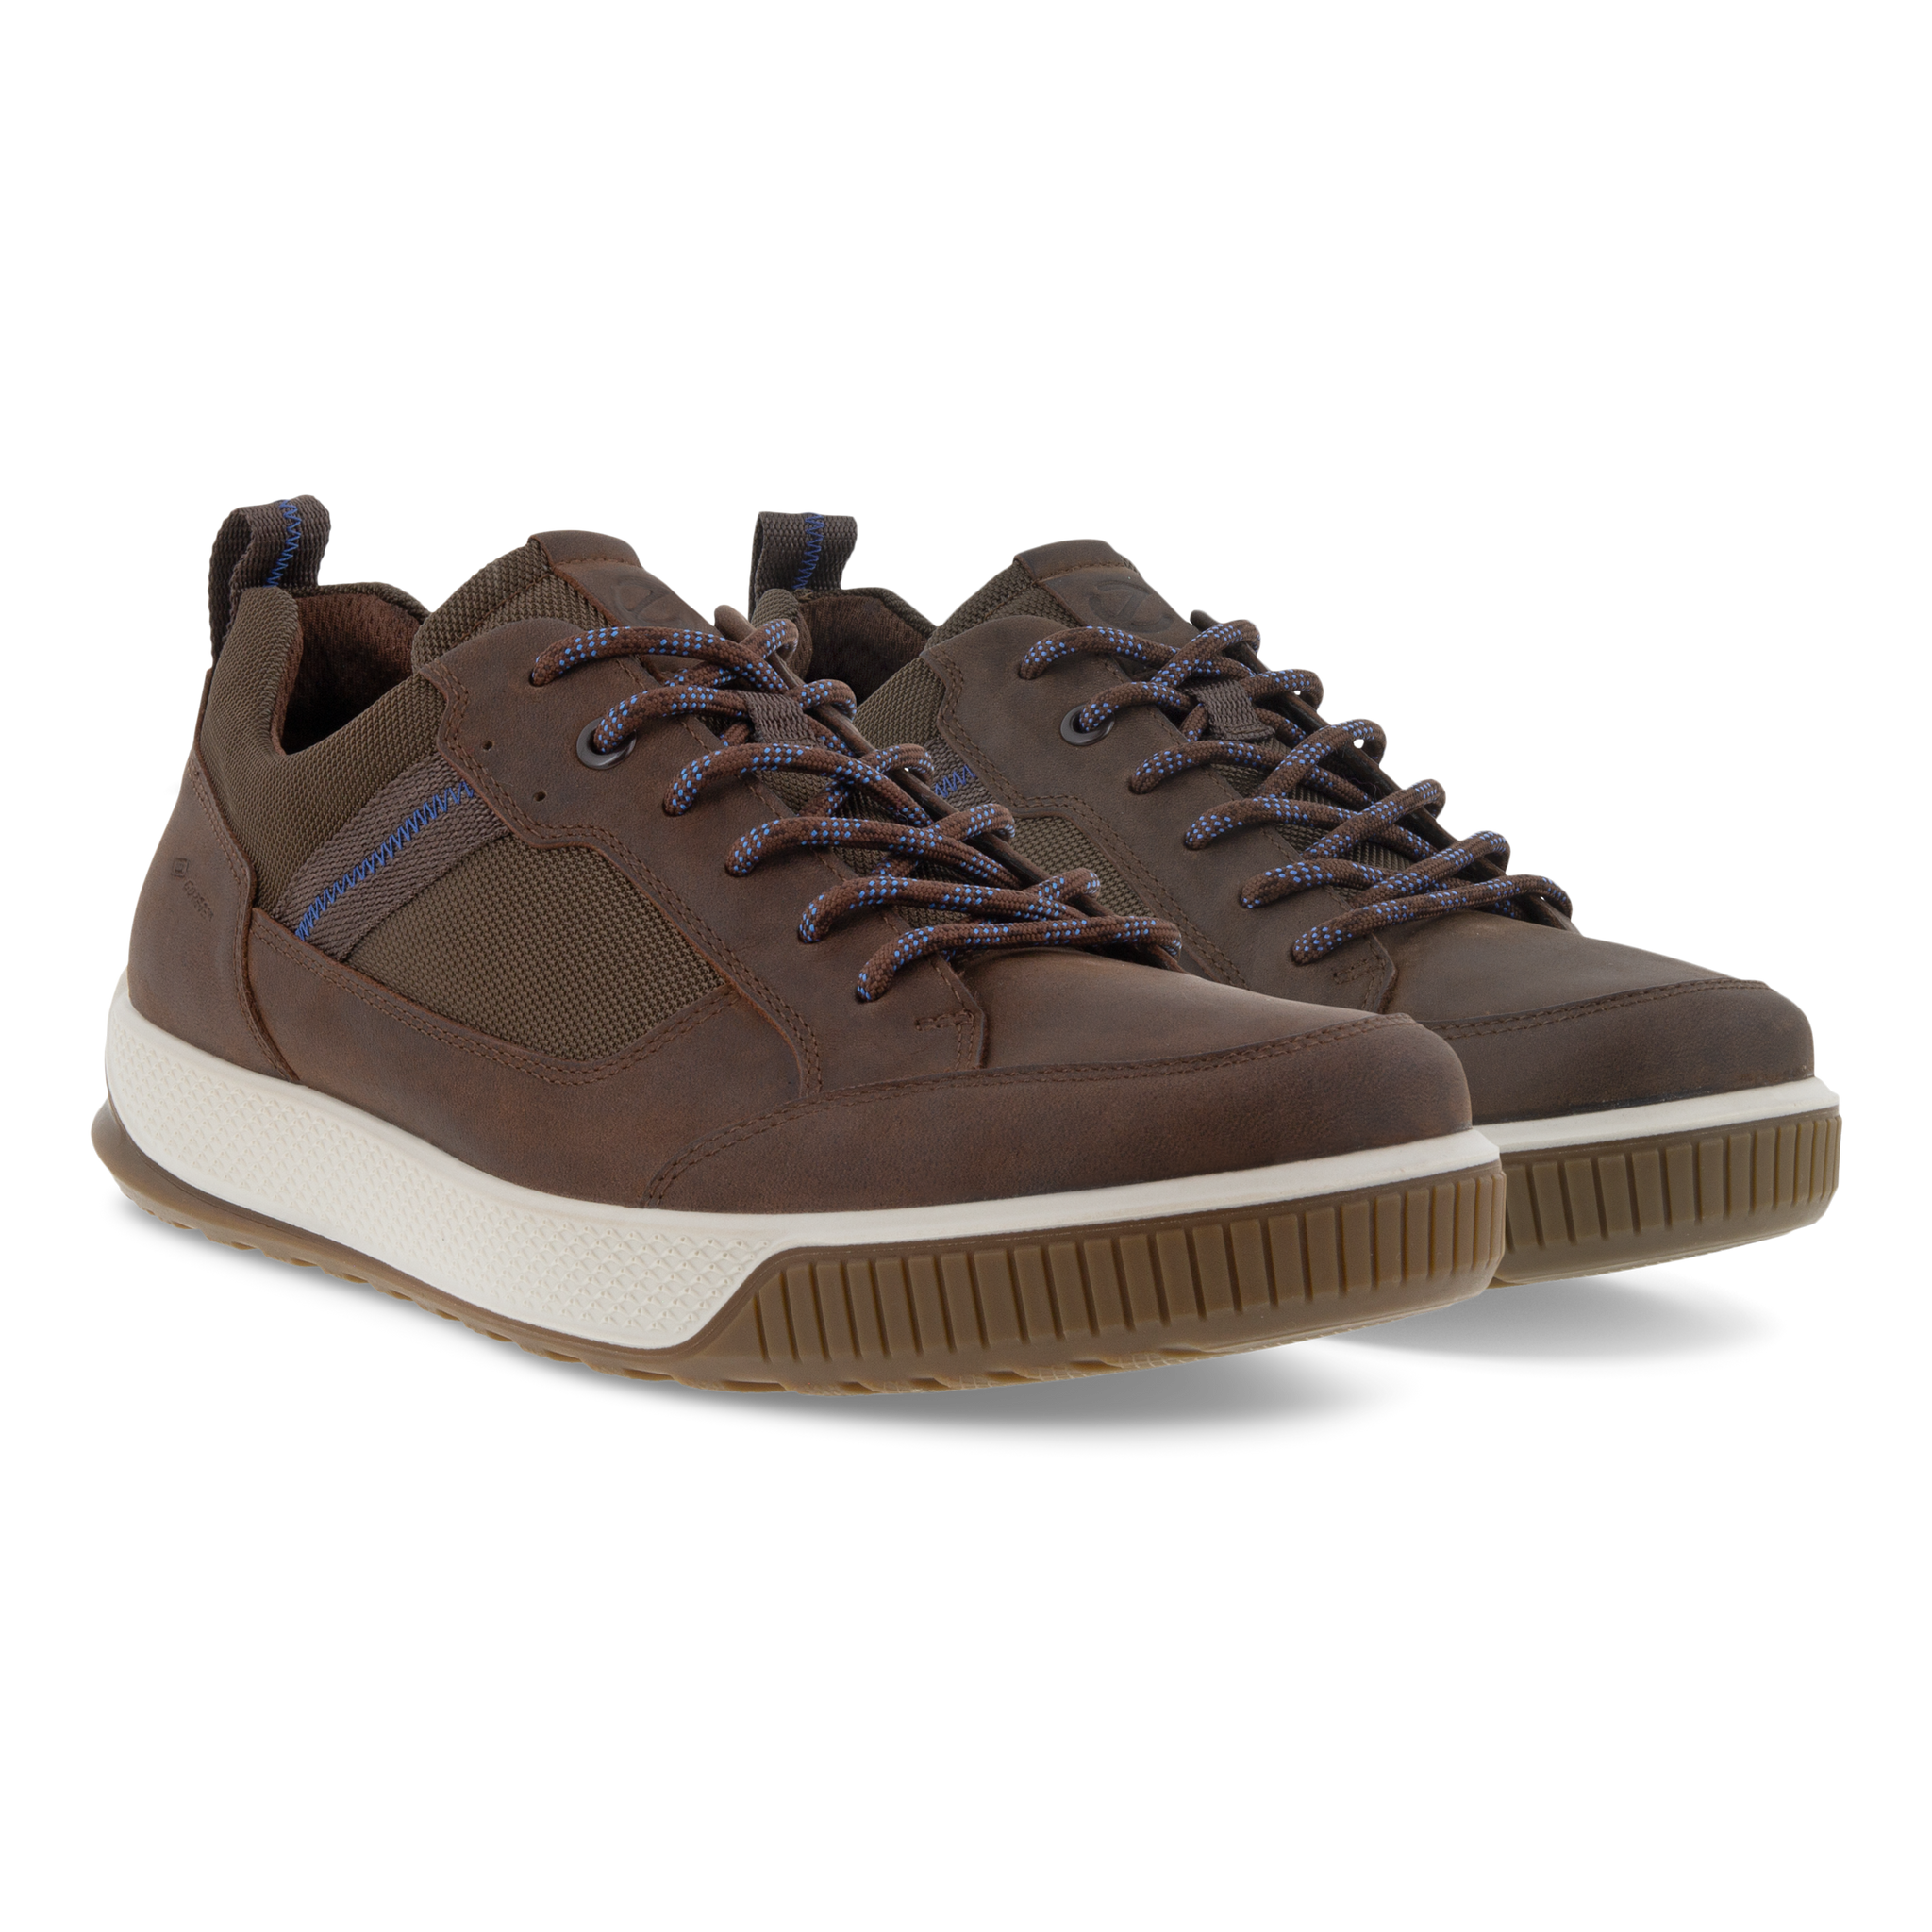 ECCO Byway Tred (501874)- Mens Gore-Tex Lace Shoes in Brown | ECCO Shoes |Wisemans | Bantry | Shoe Shop | West Cork | Ireland